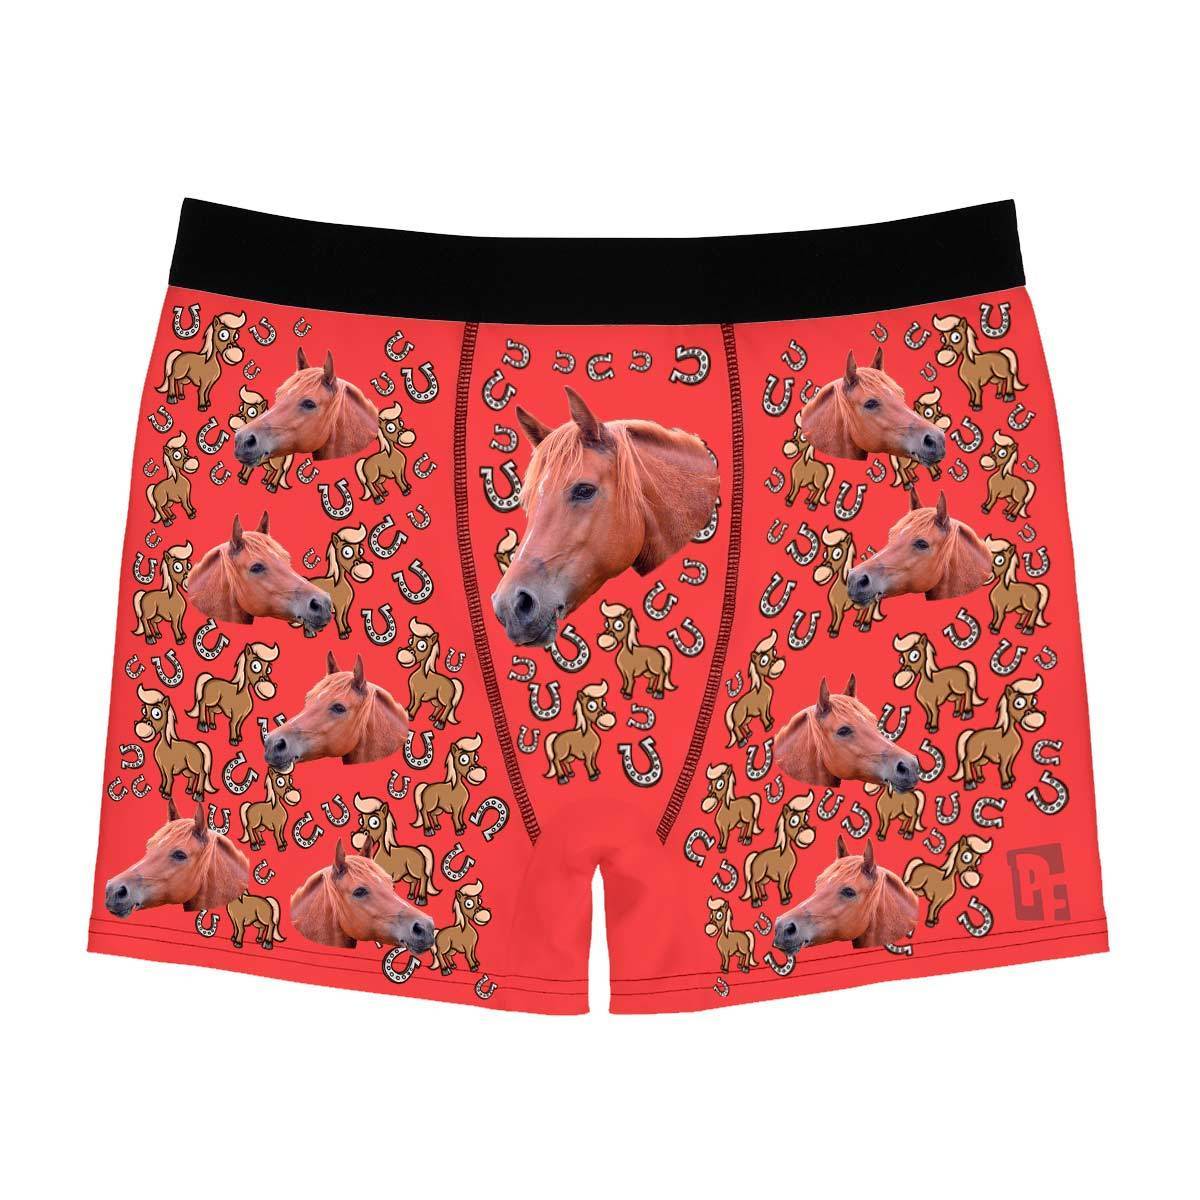 Red Horse men's boxer briefs personalized with photo printed on them